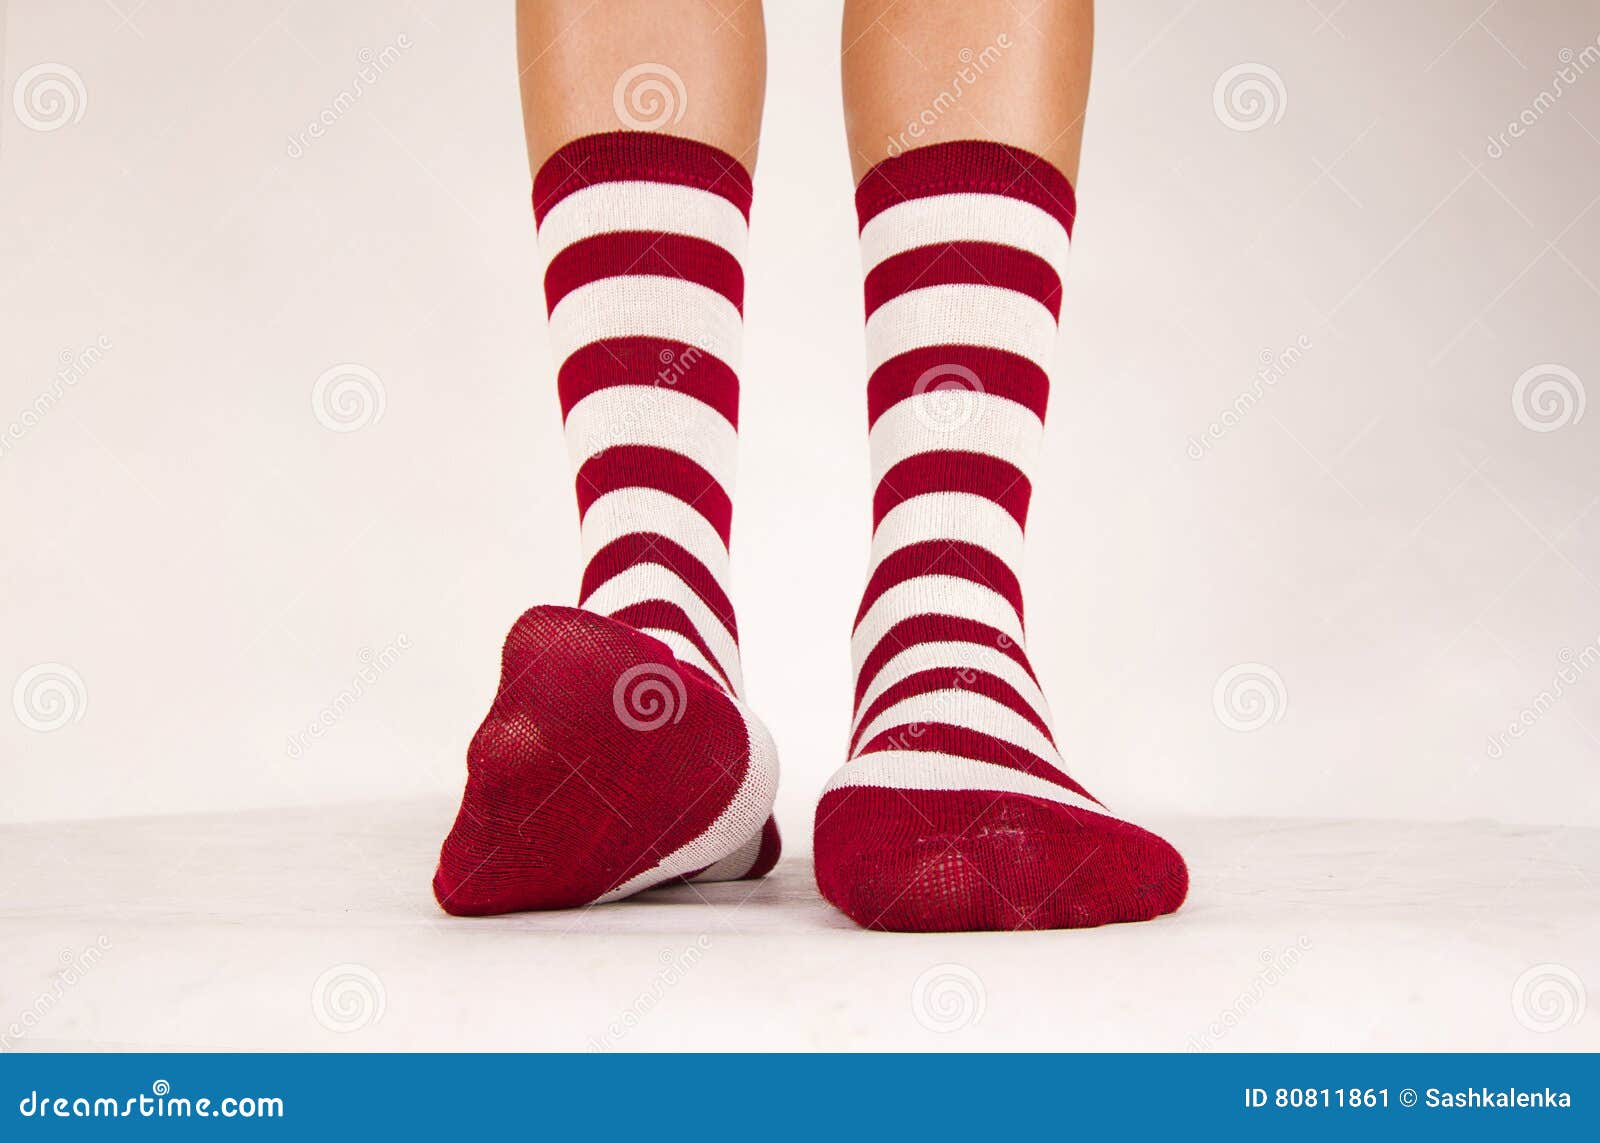 Isolated pair of socks stock image. Image of standing - 80811861